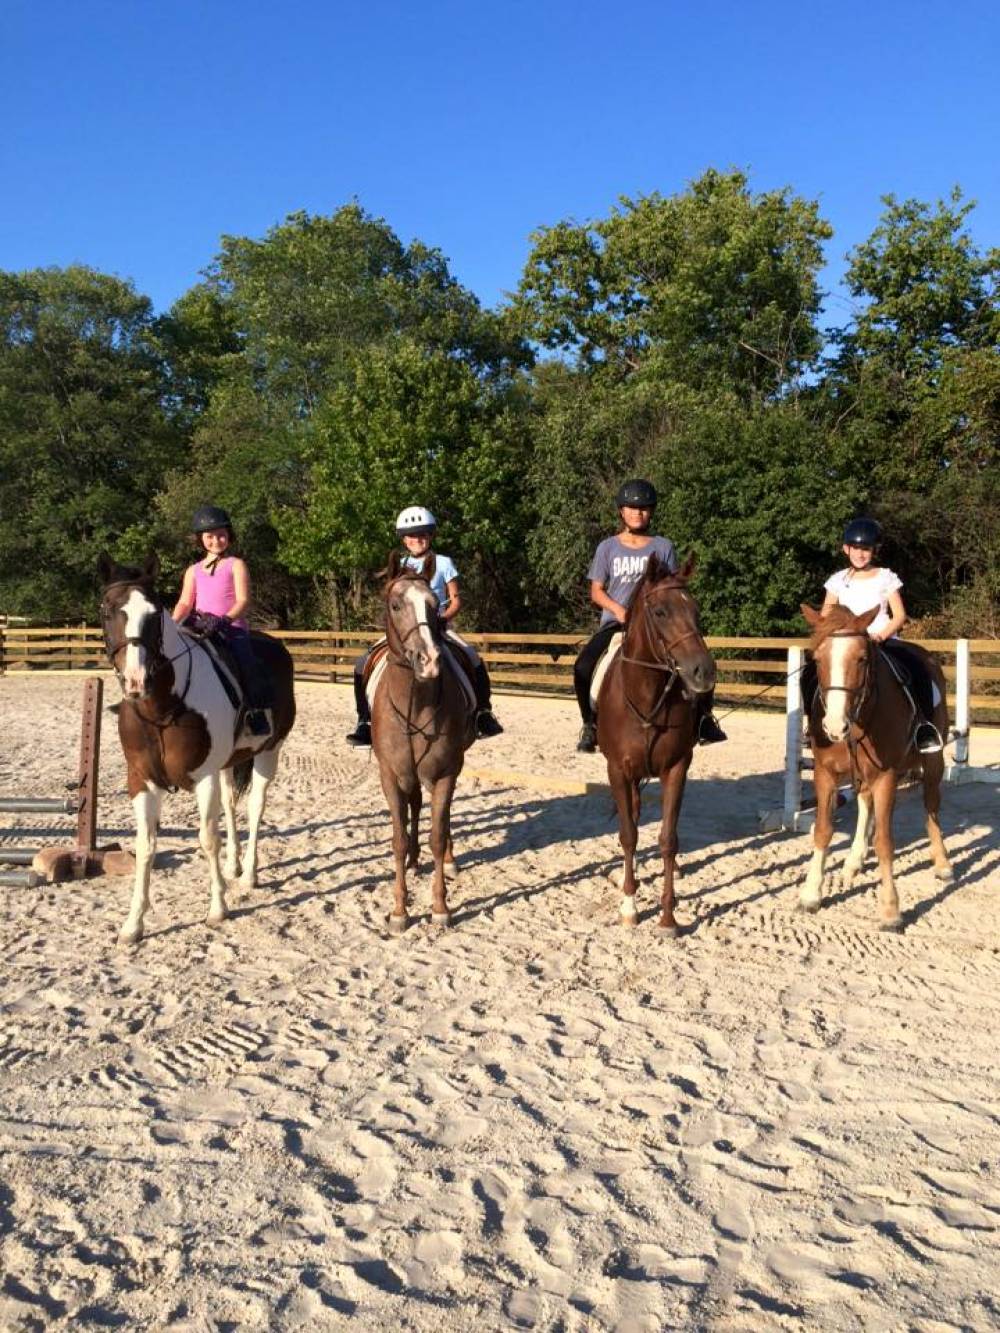 TOP ILLINOIS COED CAMP: Windridge Farm Summer Horse Camp is a Top Coed Summer Camp located in Bolingbrook Illinois offering many fun and enriching Coed and other camp programs. 